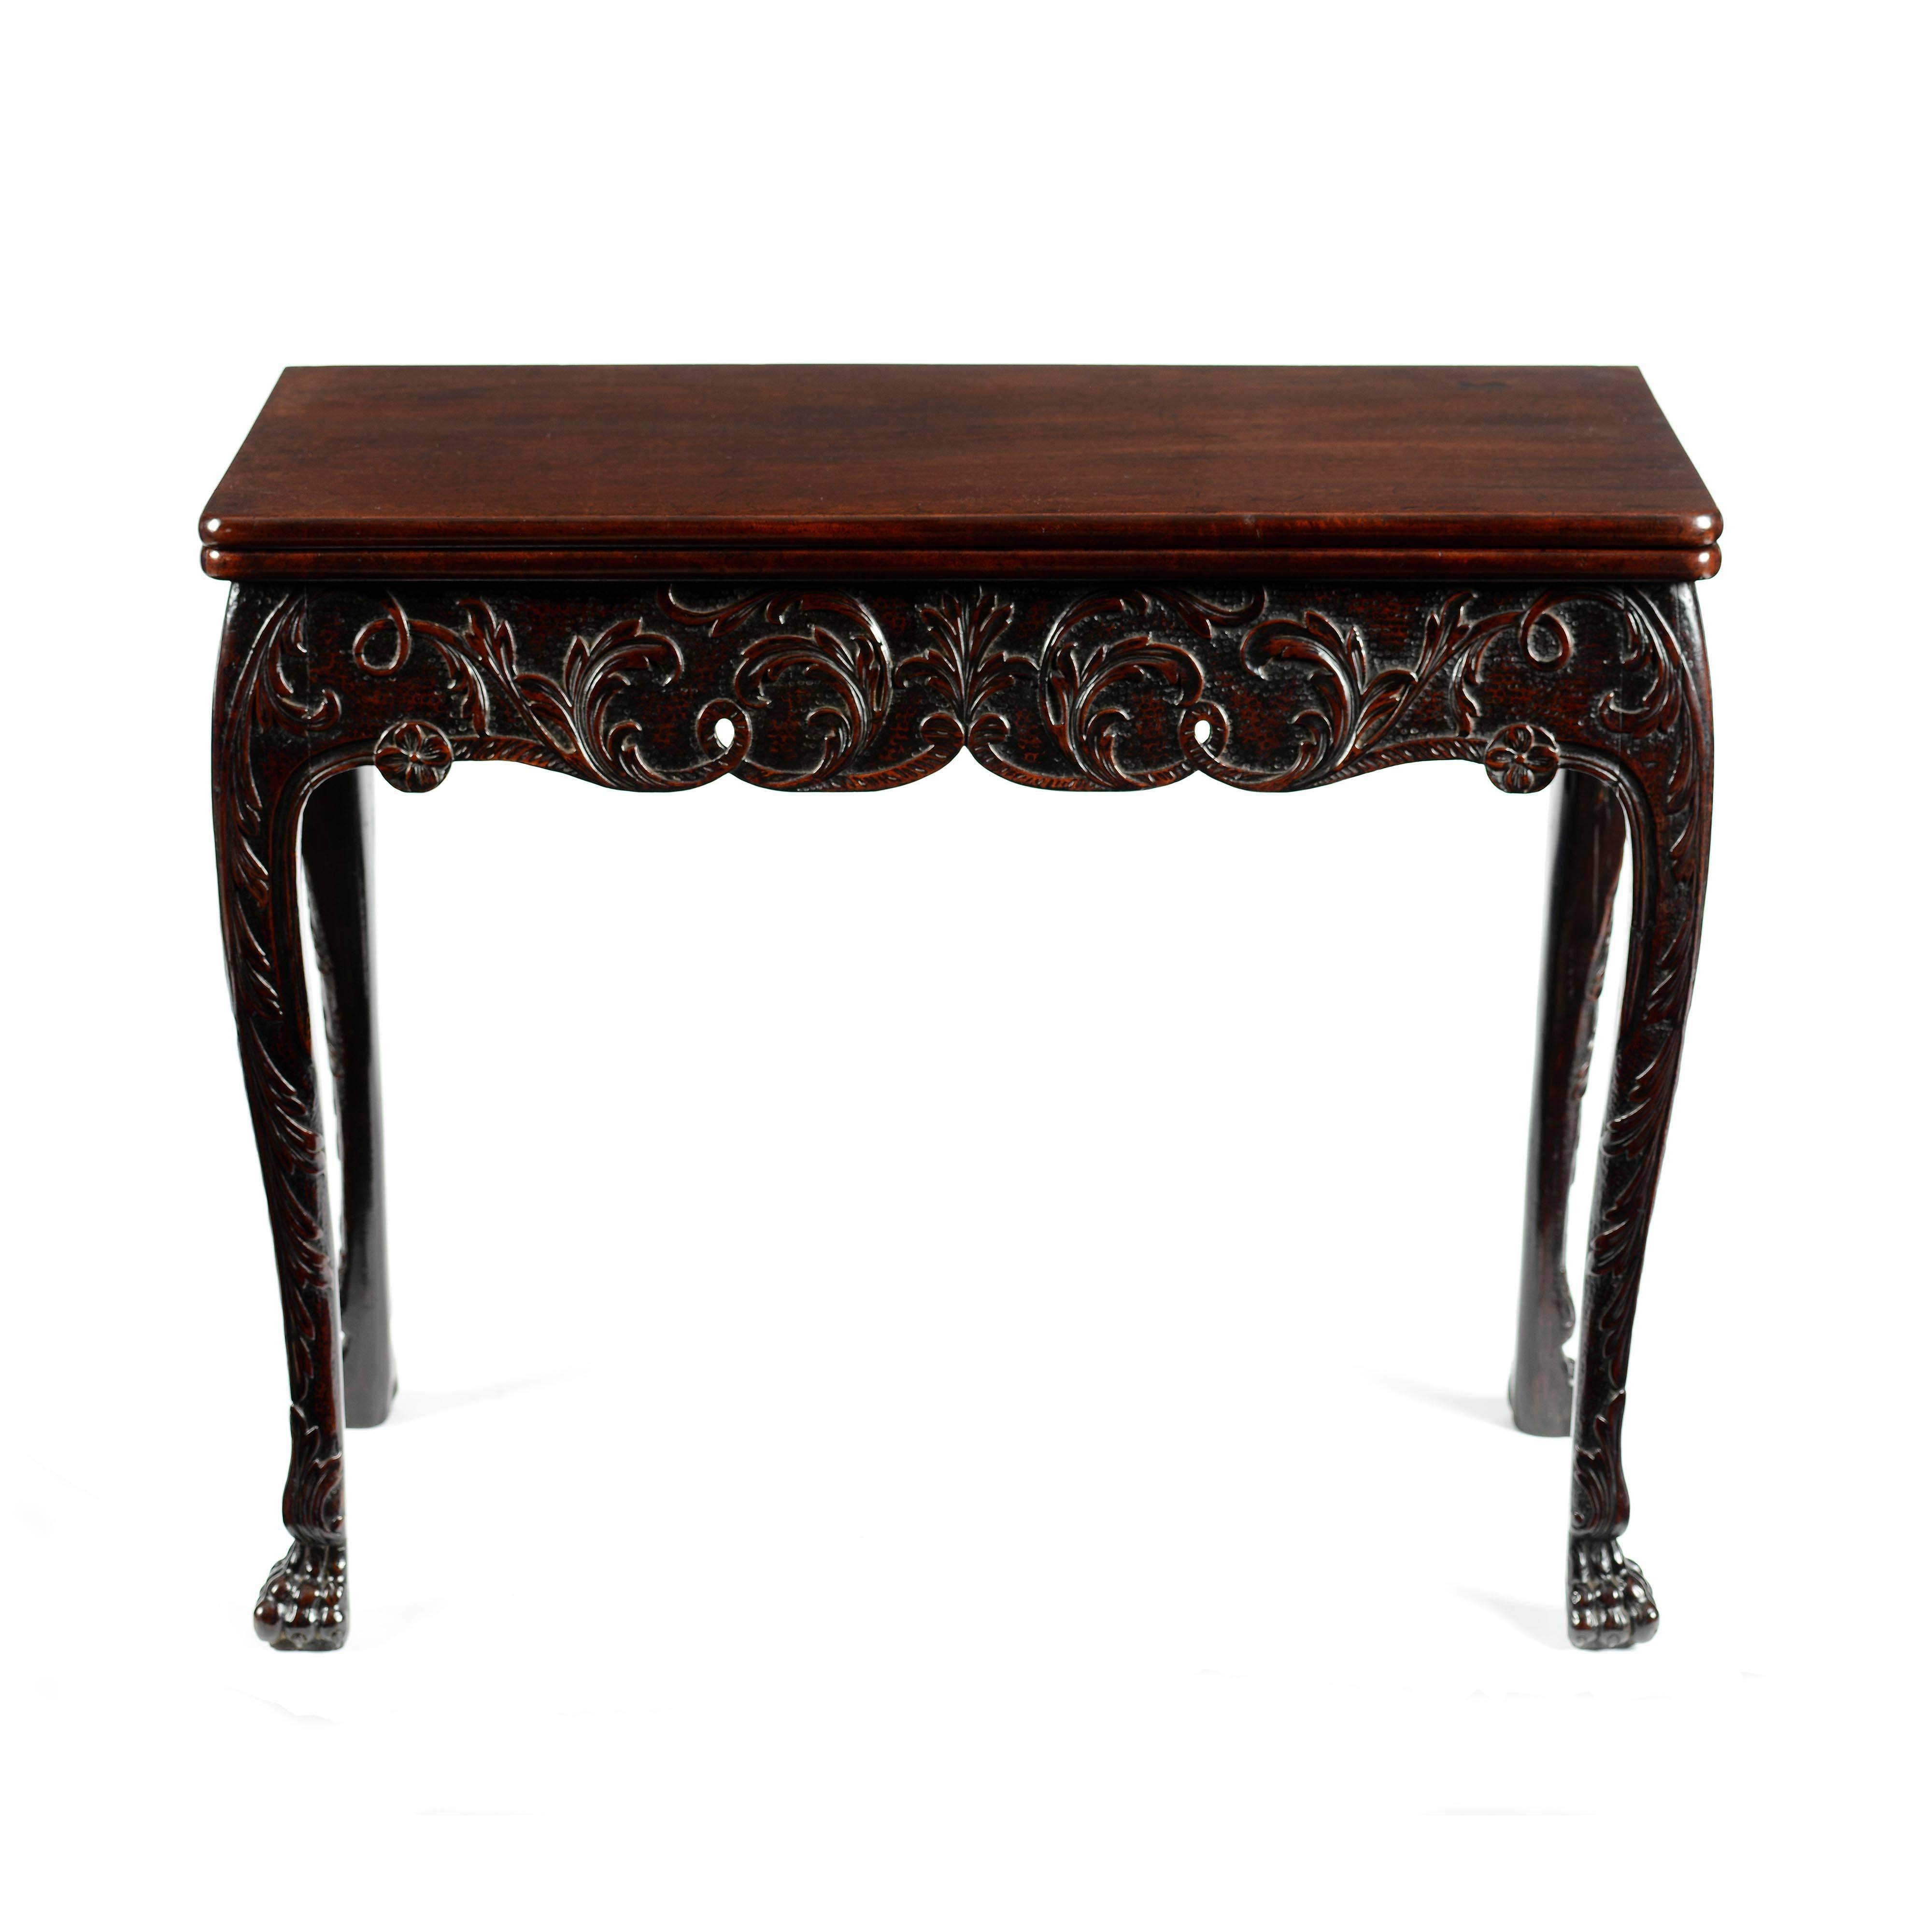 A superb very rare Irish George II Cuban mahogany card table, retaining excellent original color and patina. The rectangular top with moulded edge, over a delightful, crisp leaf and flower profusely carved scroll shaped frieze, integrating elegantly